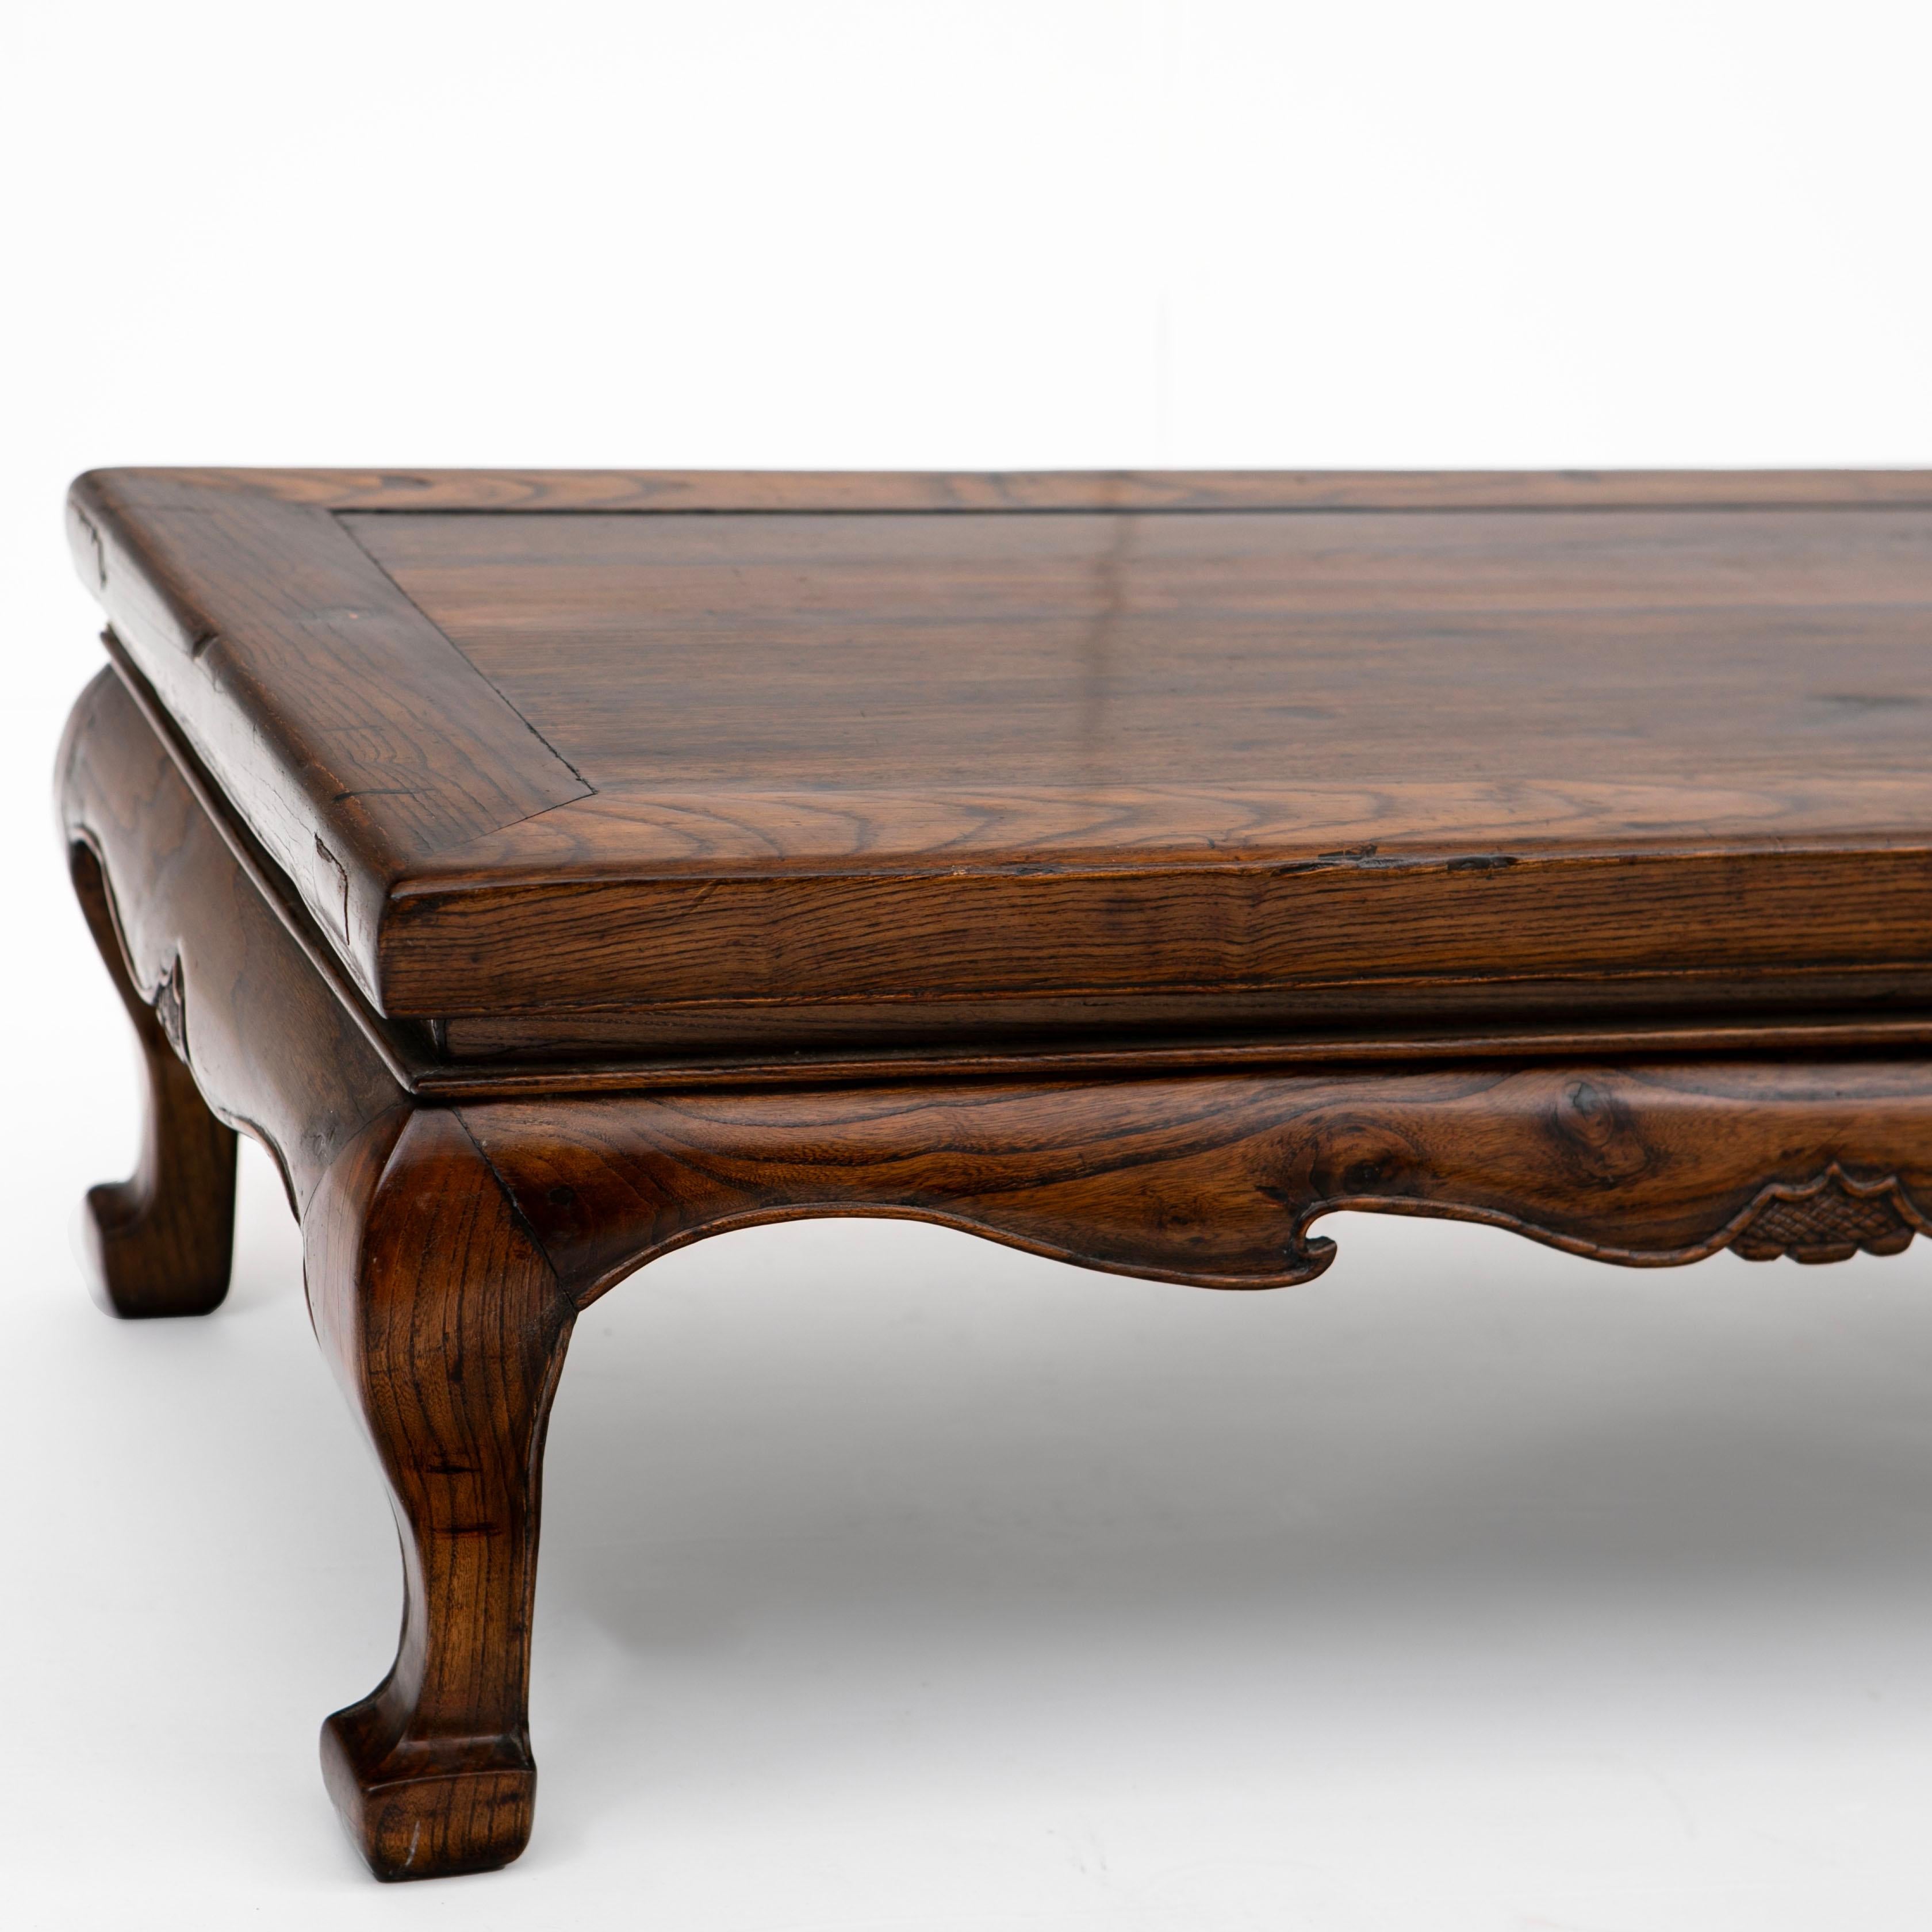 Chinese Mid 19th Century Qing Dynasty Kang / Low Table For Sale 1